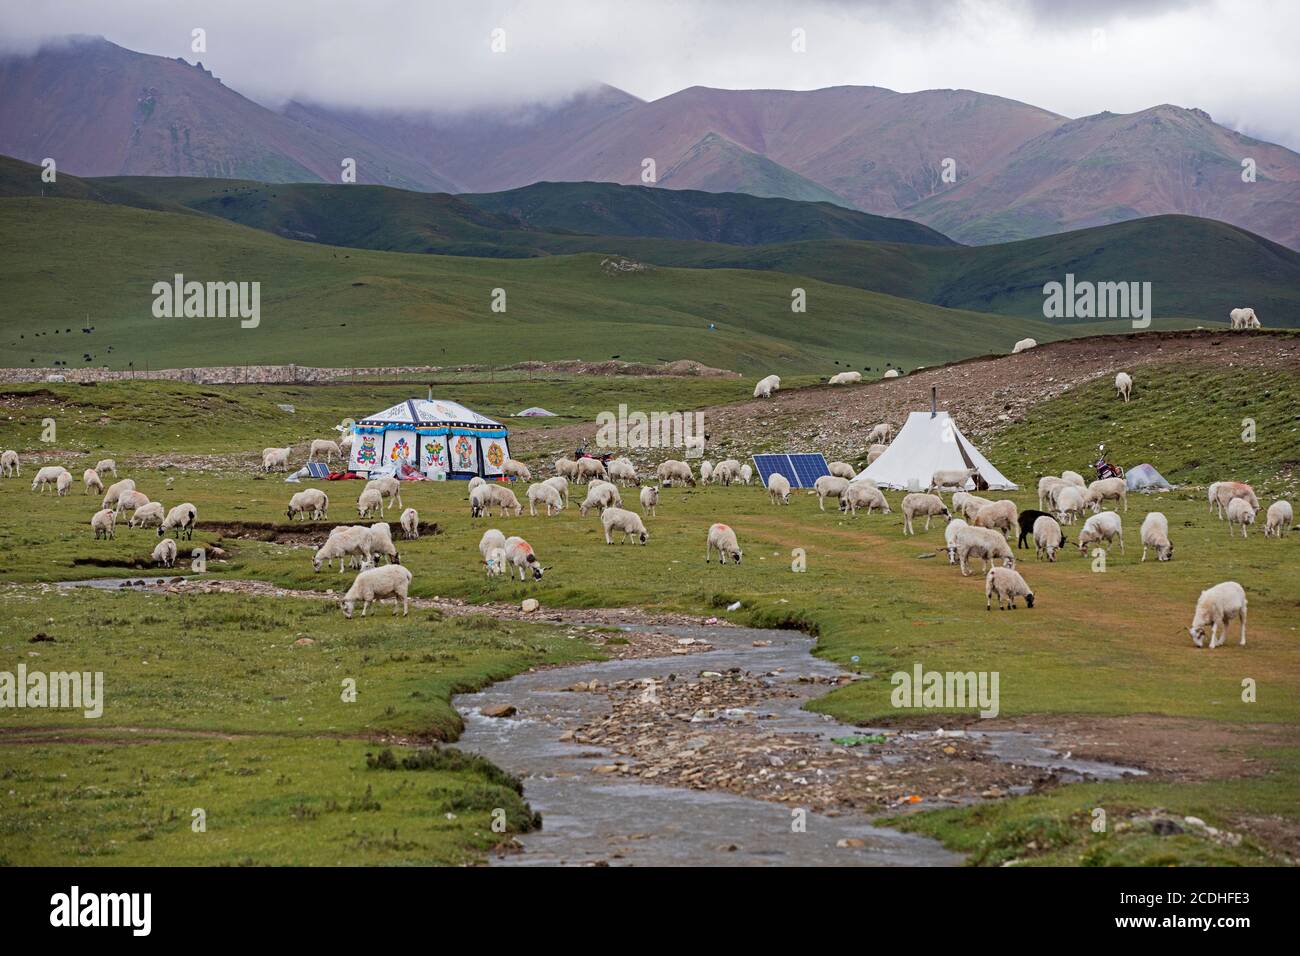 Sheep and Tibetan nomadic tent with solar panels in the Chinese Himalayas, China Stock Photo